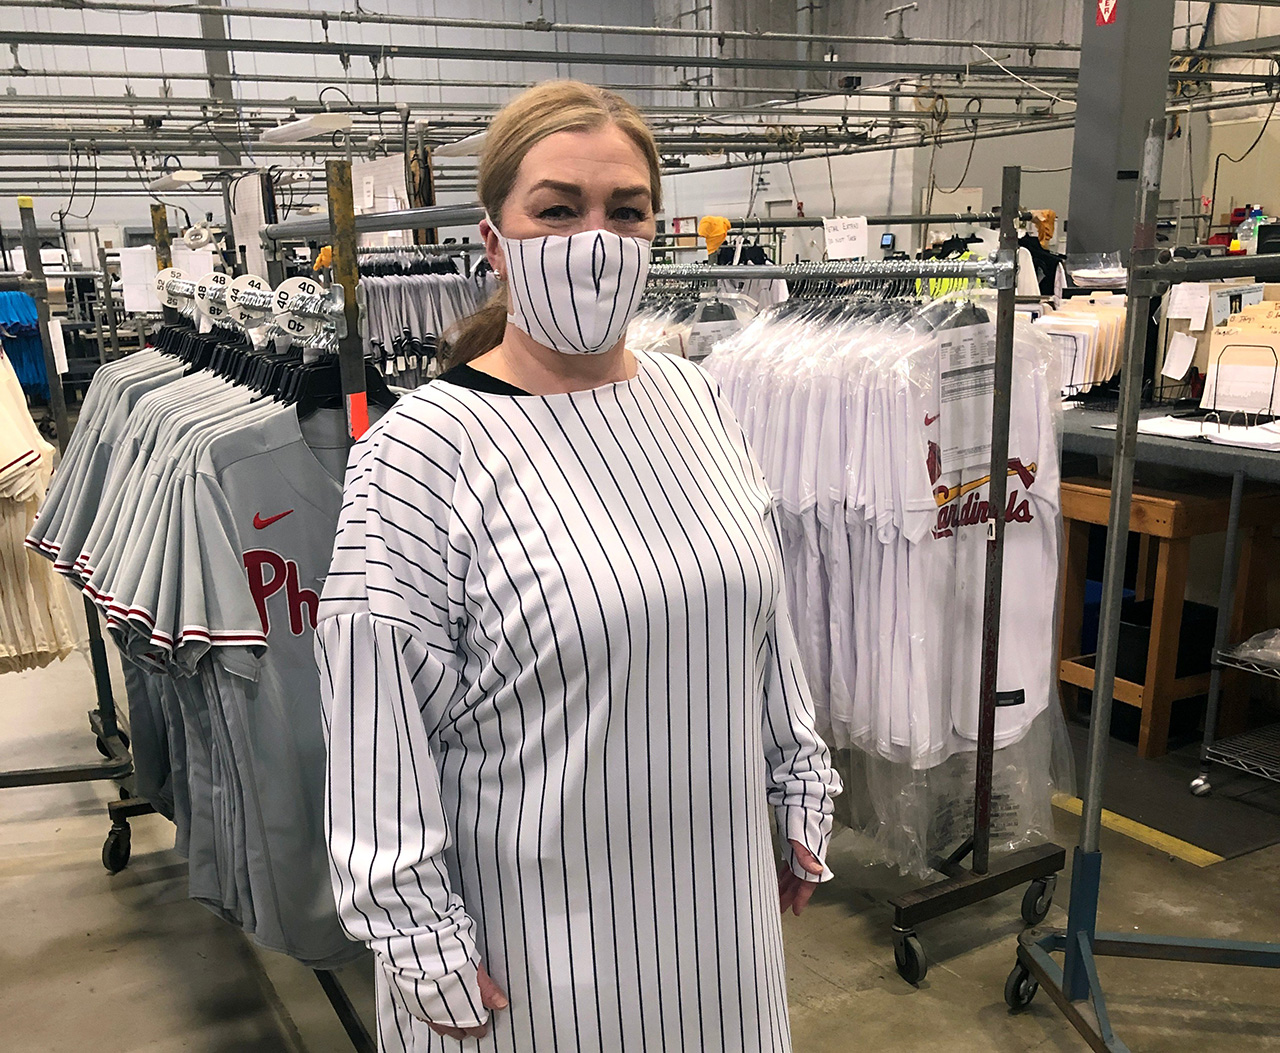 Fanatics shifts jersey production to personal protective equipment